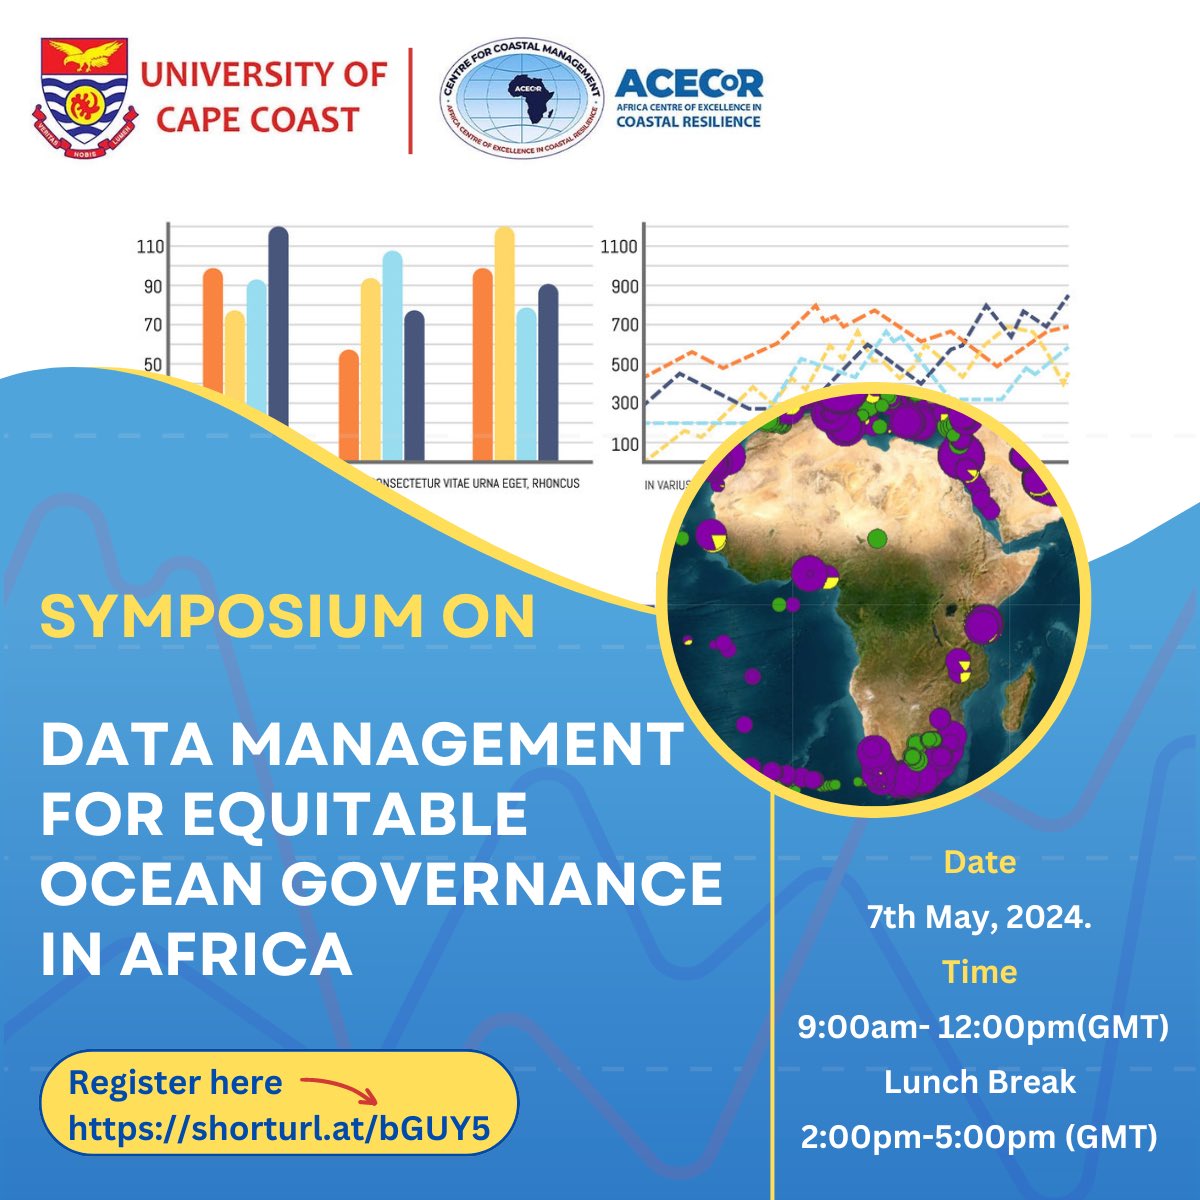 What are your thoughts on ocean governance in Africa? How can data play a role in achieving equitable ocean governance in Africa? Share your insights and let’s discuss! Anticipate; Symposium on Data Management for Equitable Ocean Governance in Africa, happening on May 7th, 2024.